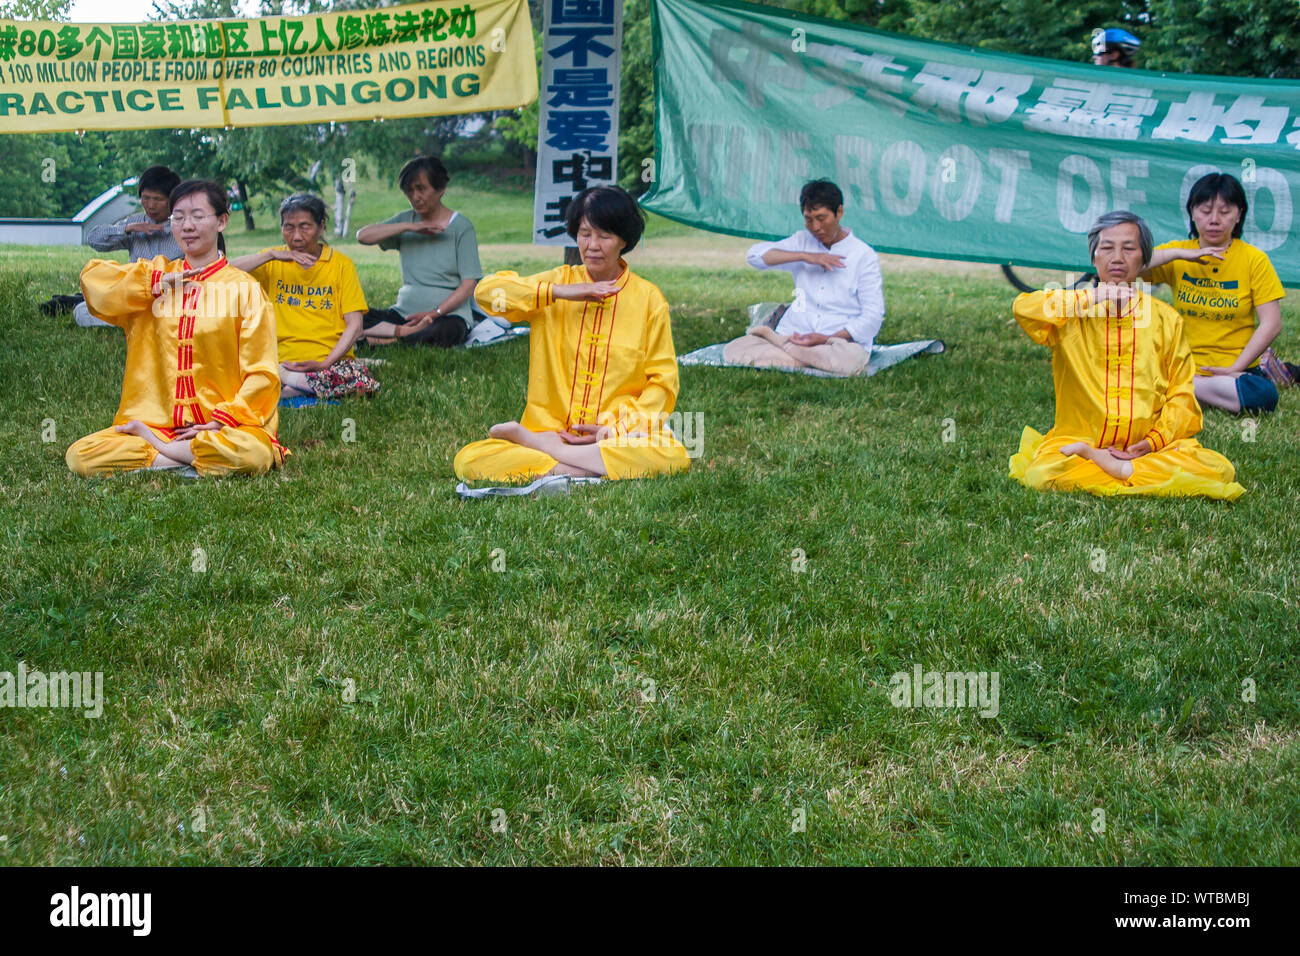 Toronto, Canada - Chinese followers of Falungong practicing meditation and exercises at a public park of Toronto Stock Photo